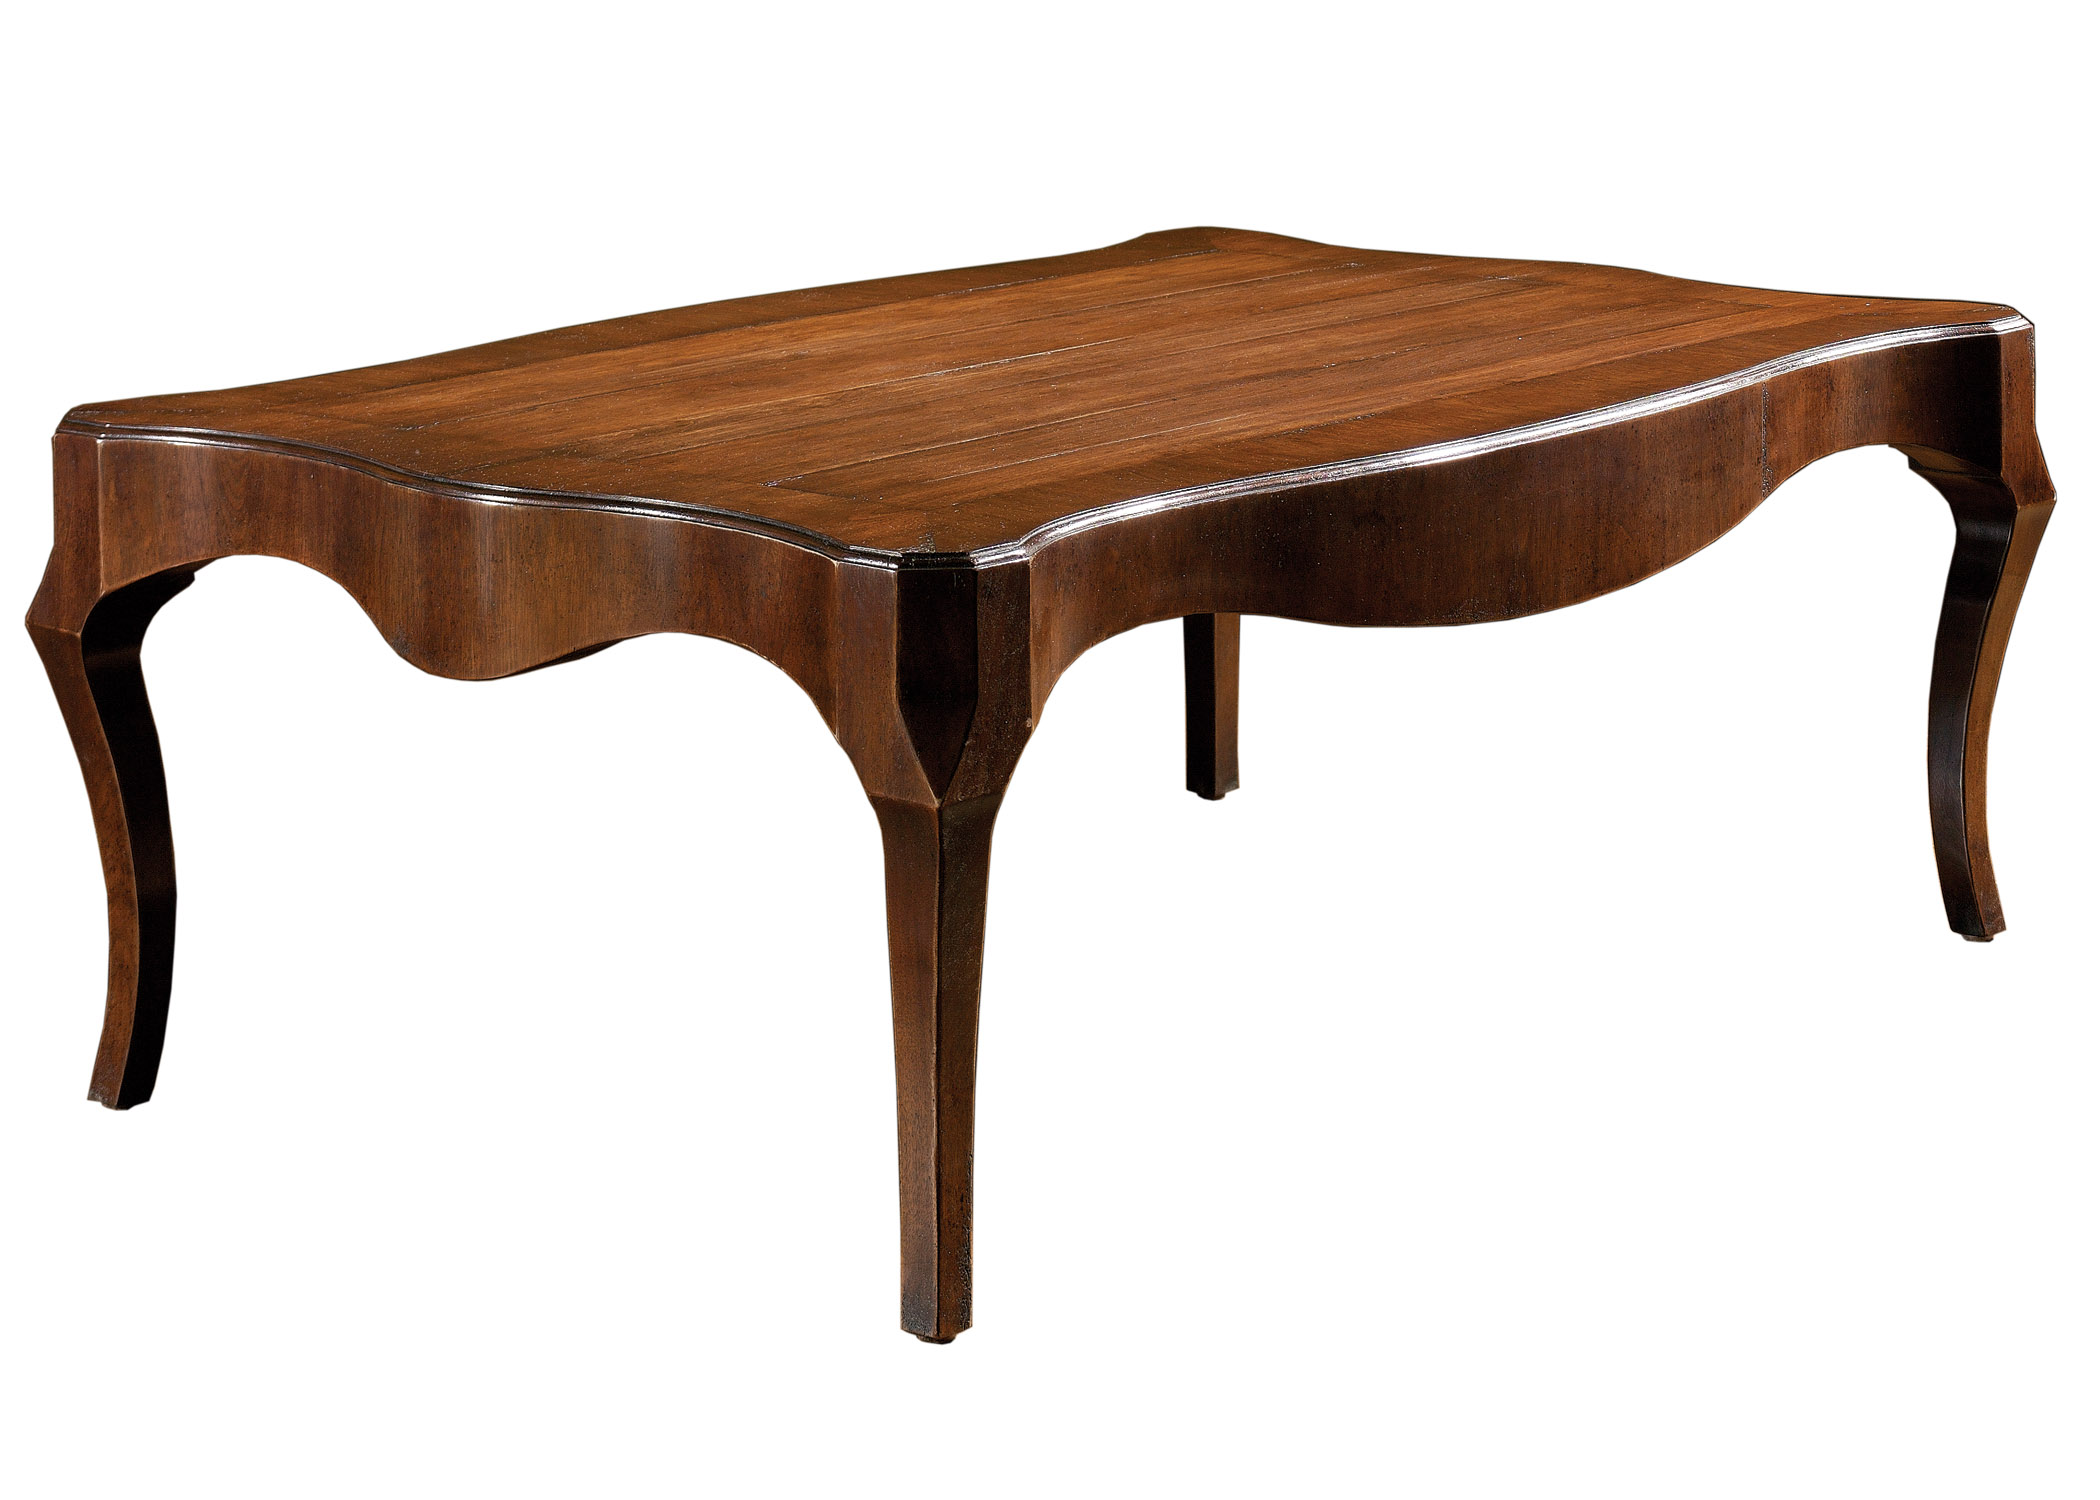 Dunraven transitional traditional cocktail coffee table with curved apron by Woodland furniture in Idaho Falls